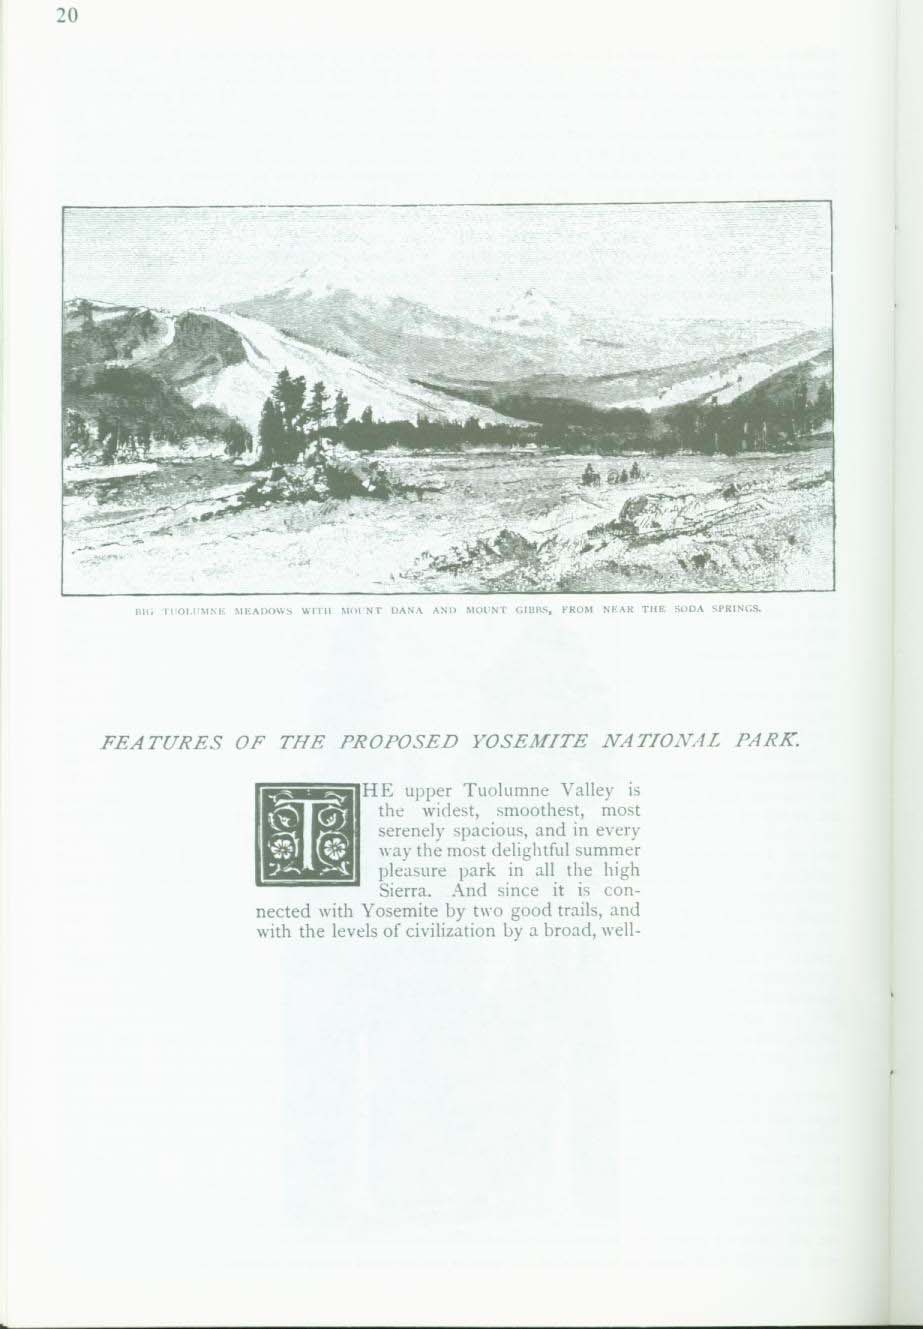 THE PROPOSED YOSEMITE NATIONAL PARK--treasures & features, 1890. vist0003i